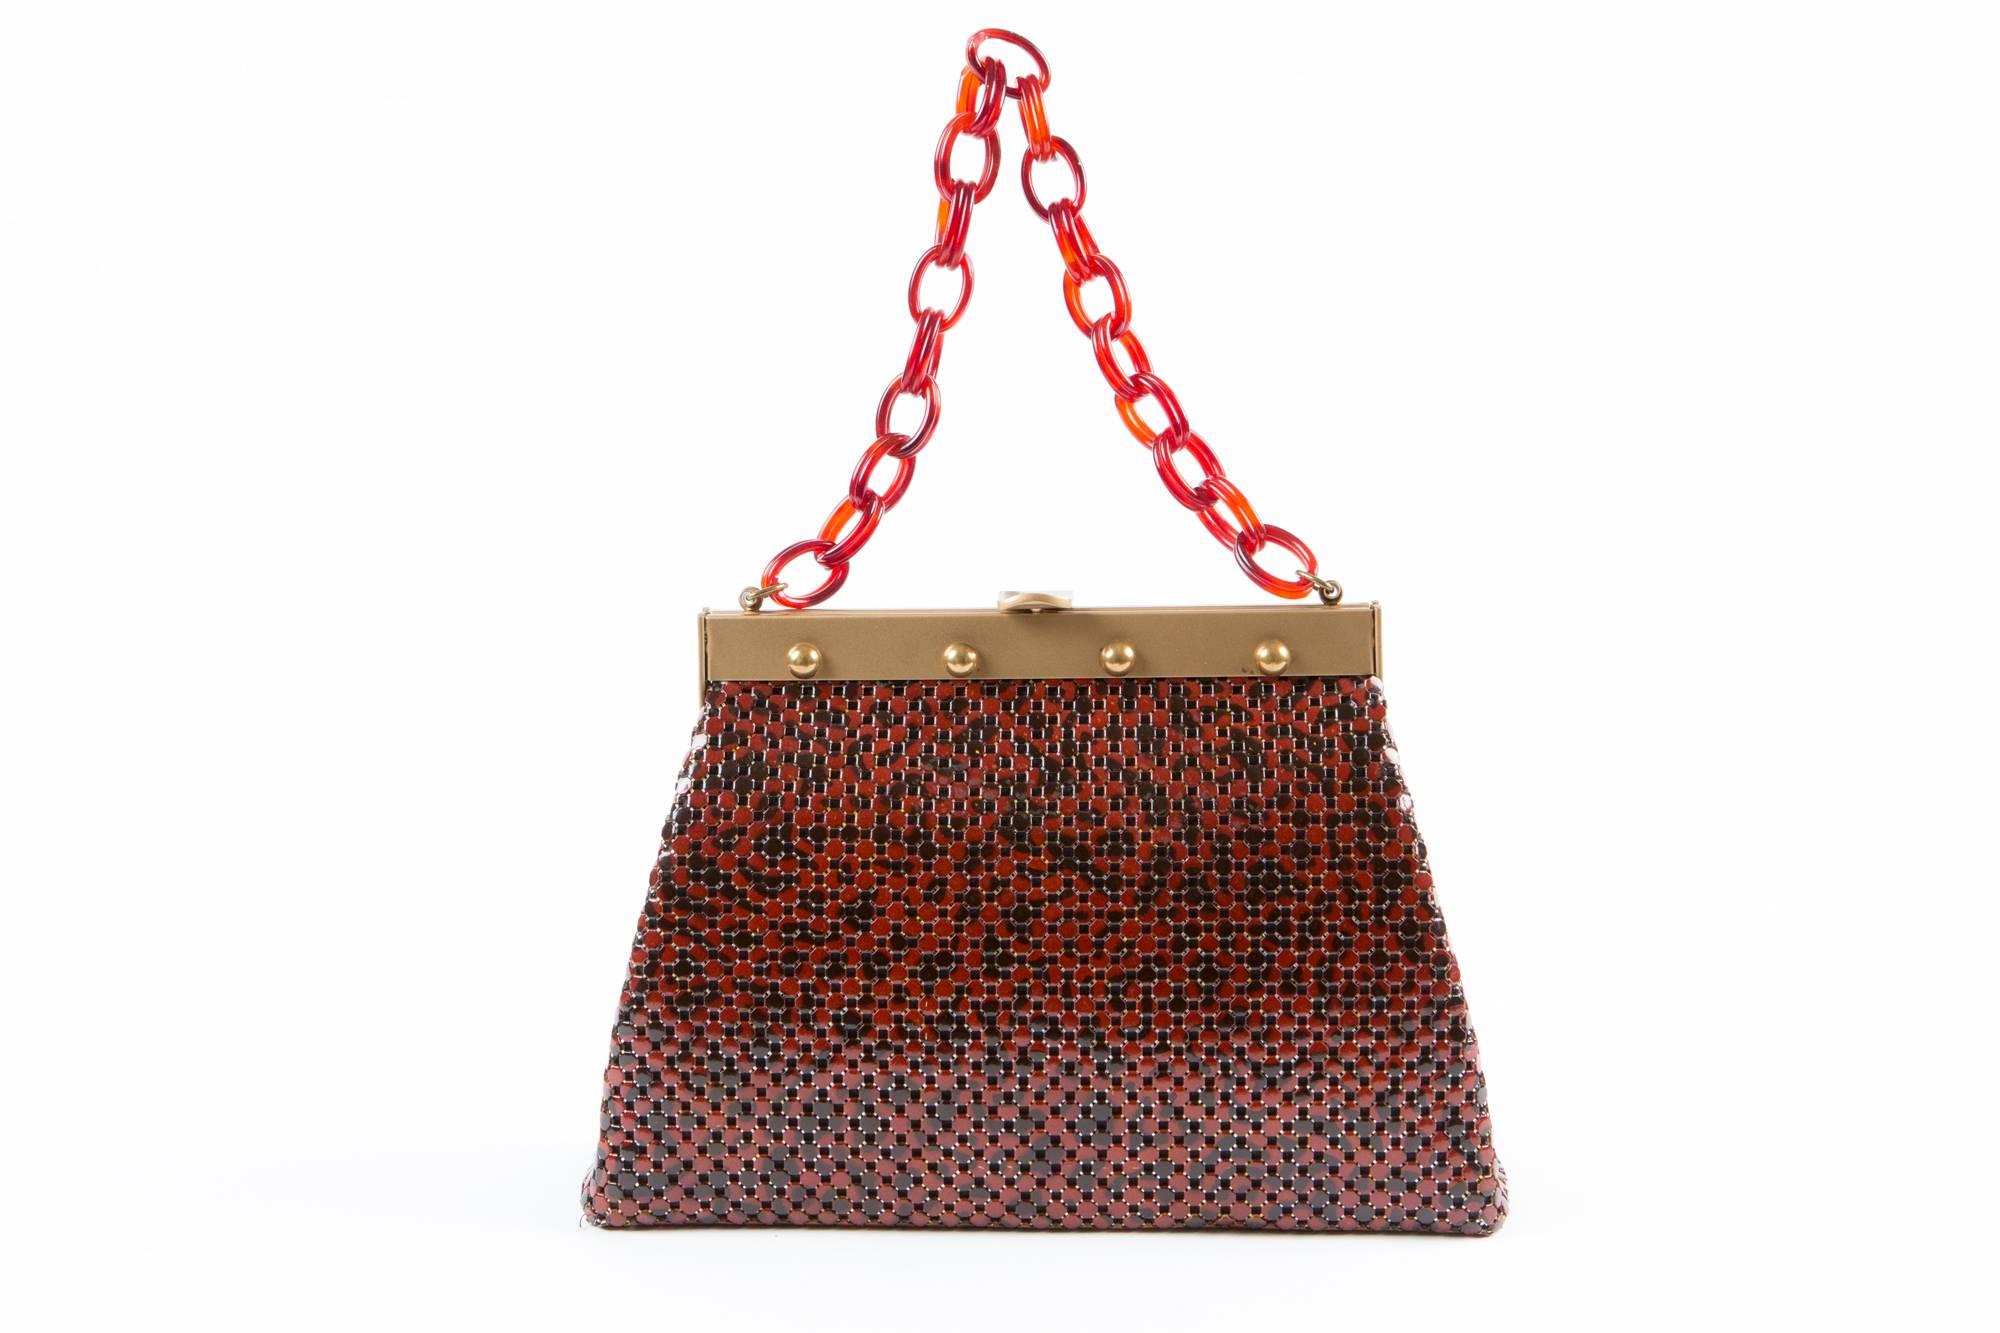 
50s-60s wonderfull Whiting & Davis rusty & brown hardware mesh handbag featuring a gold tone frame and closure, a rusty bakelite handle, a brown silk lining.
Bottom Length: 11,4 in. ( 29cm ) 
Height Bag: 7,4in. ( 19cm )
Bottom Width: 3,1in. (